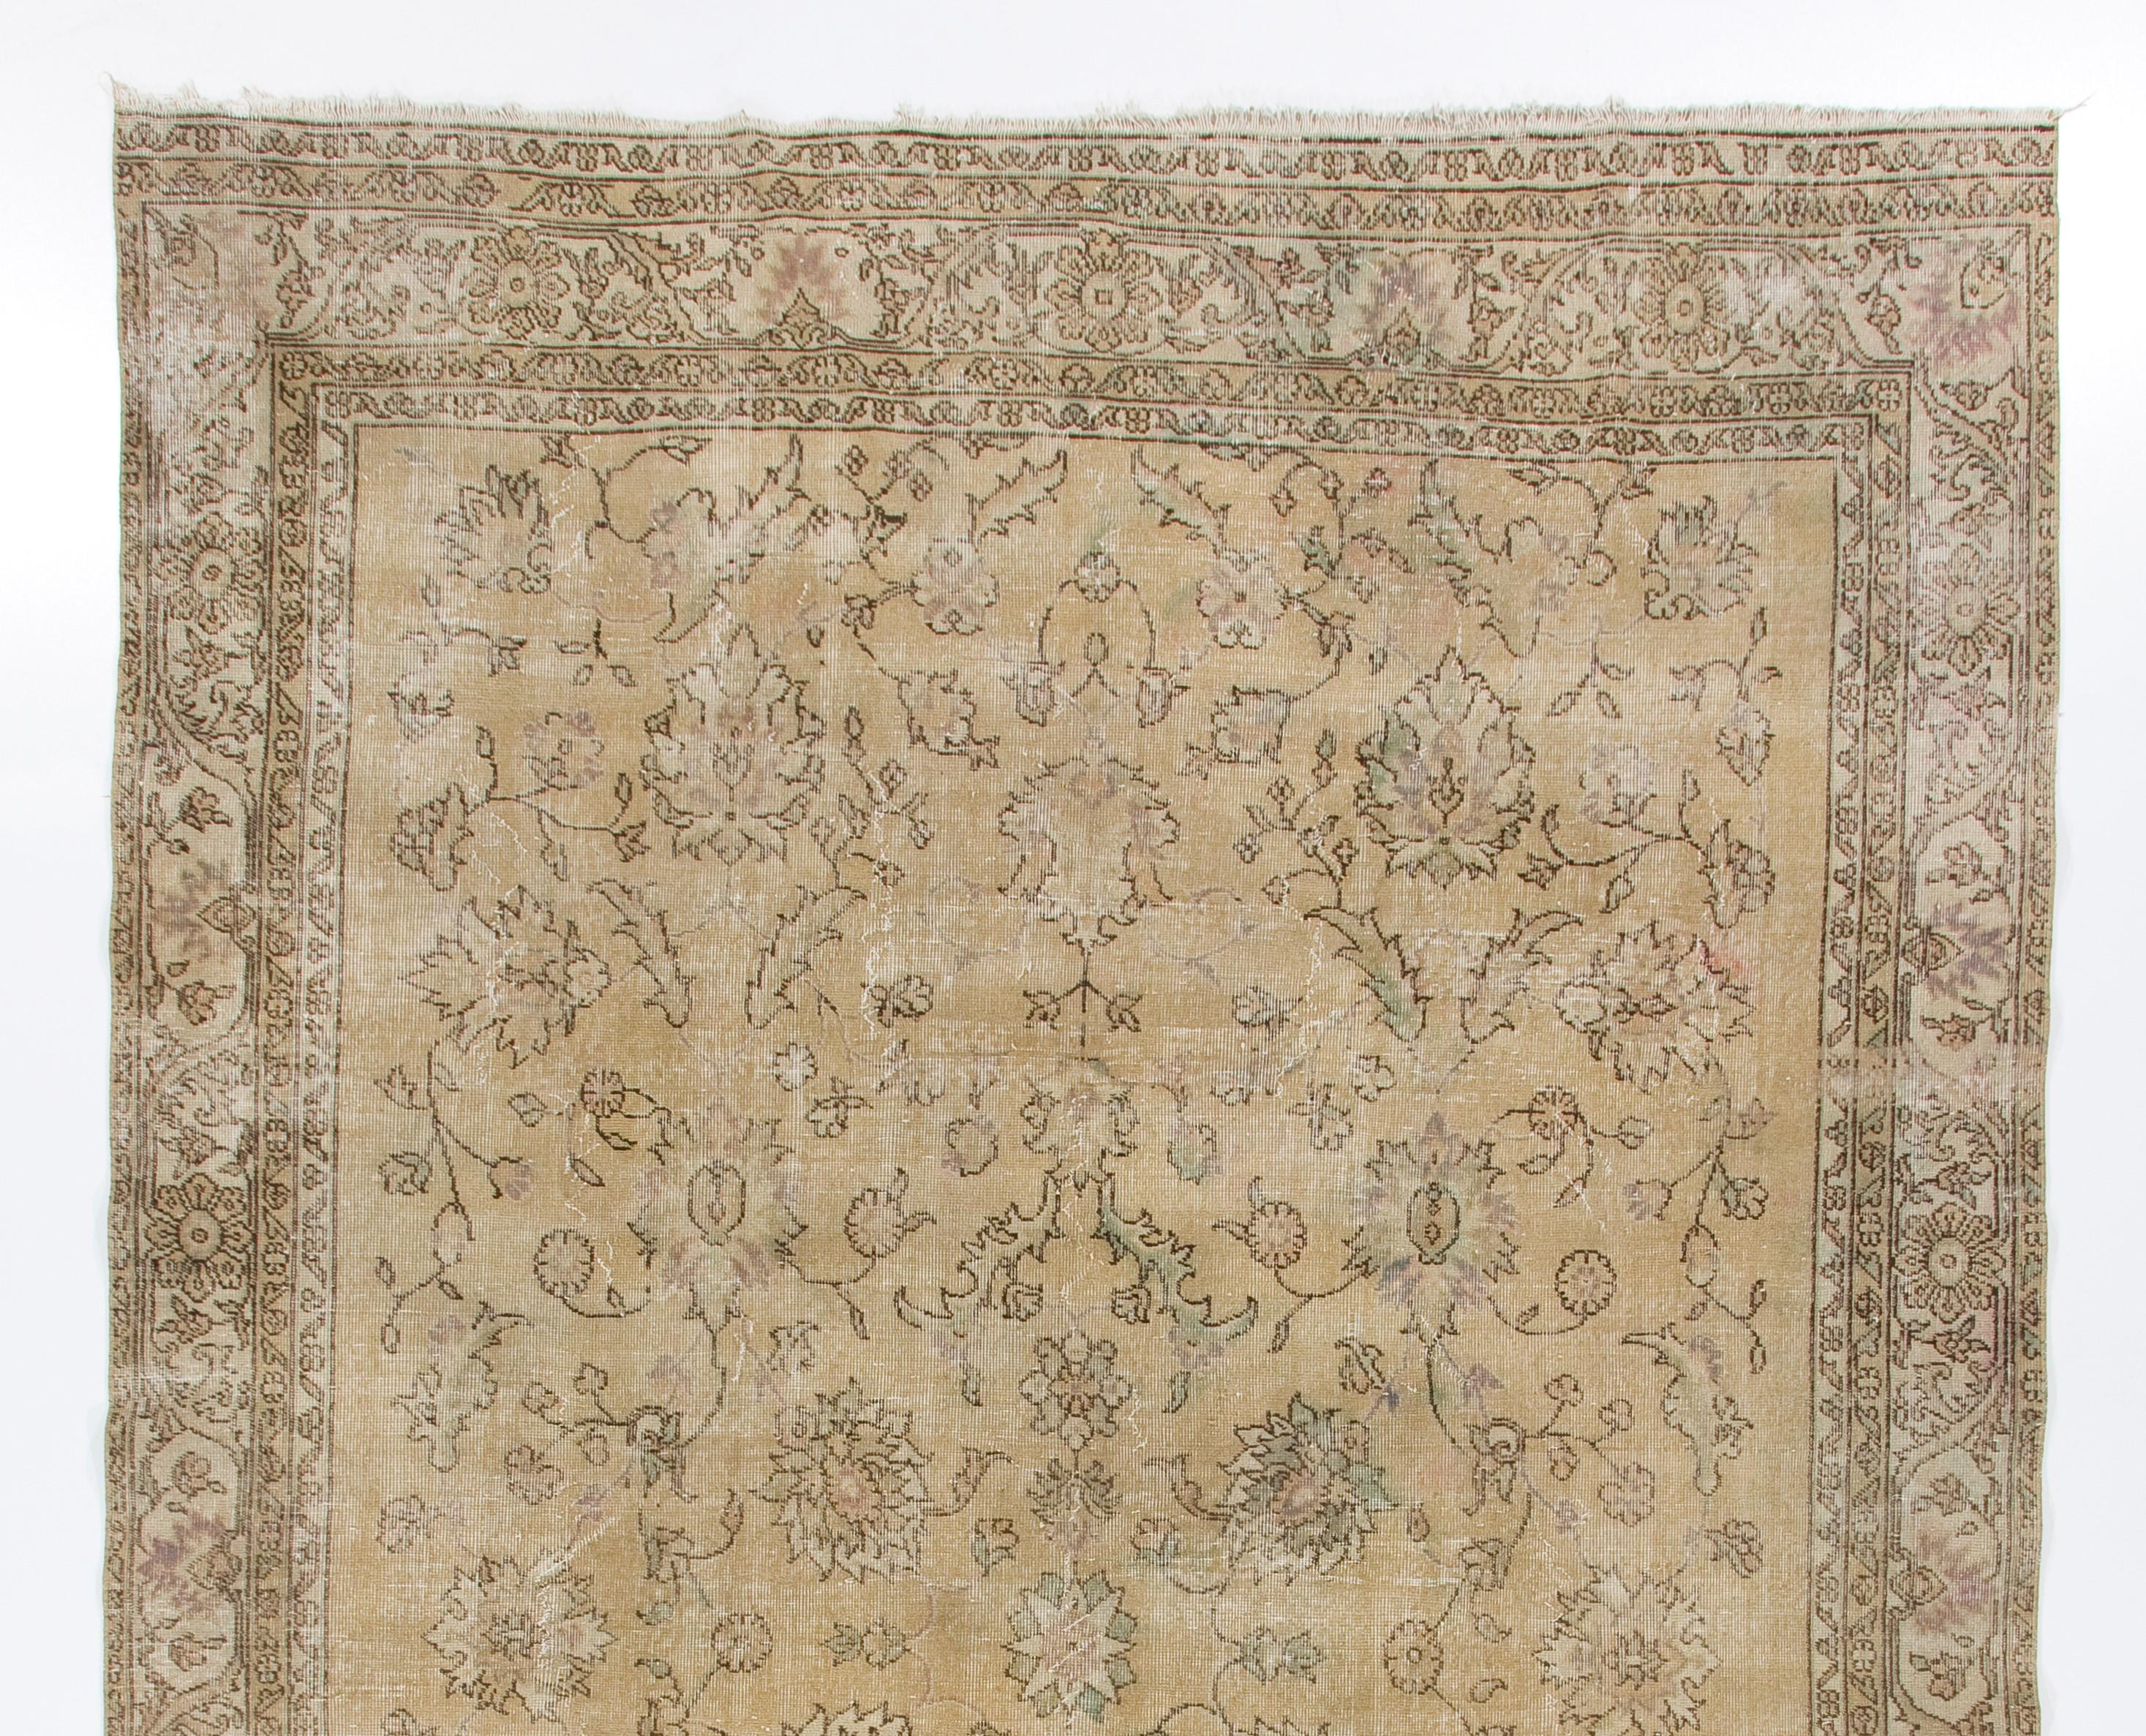 A large, finely hand-knotted vintage Turkish Oushak area rug from the 1950s with a classical design of large rosettes floating in its field and floral and leafy vines depicted in an eternally graceful and circular form of movement filling the rest